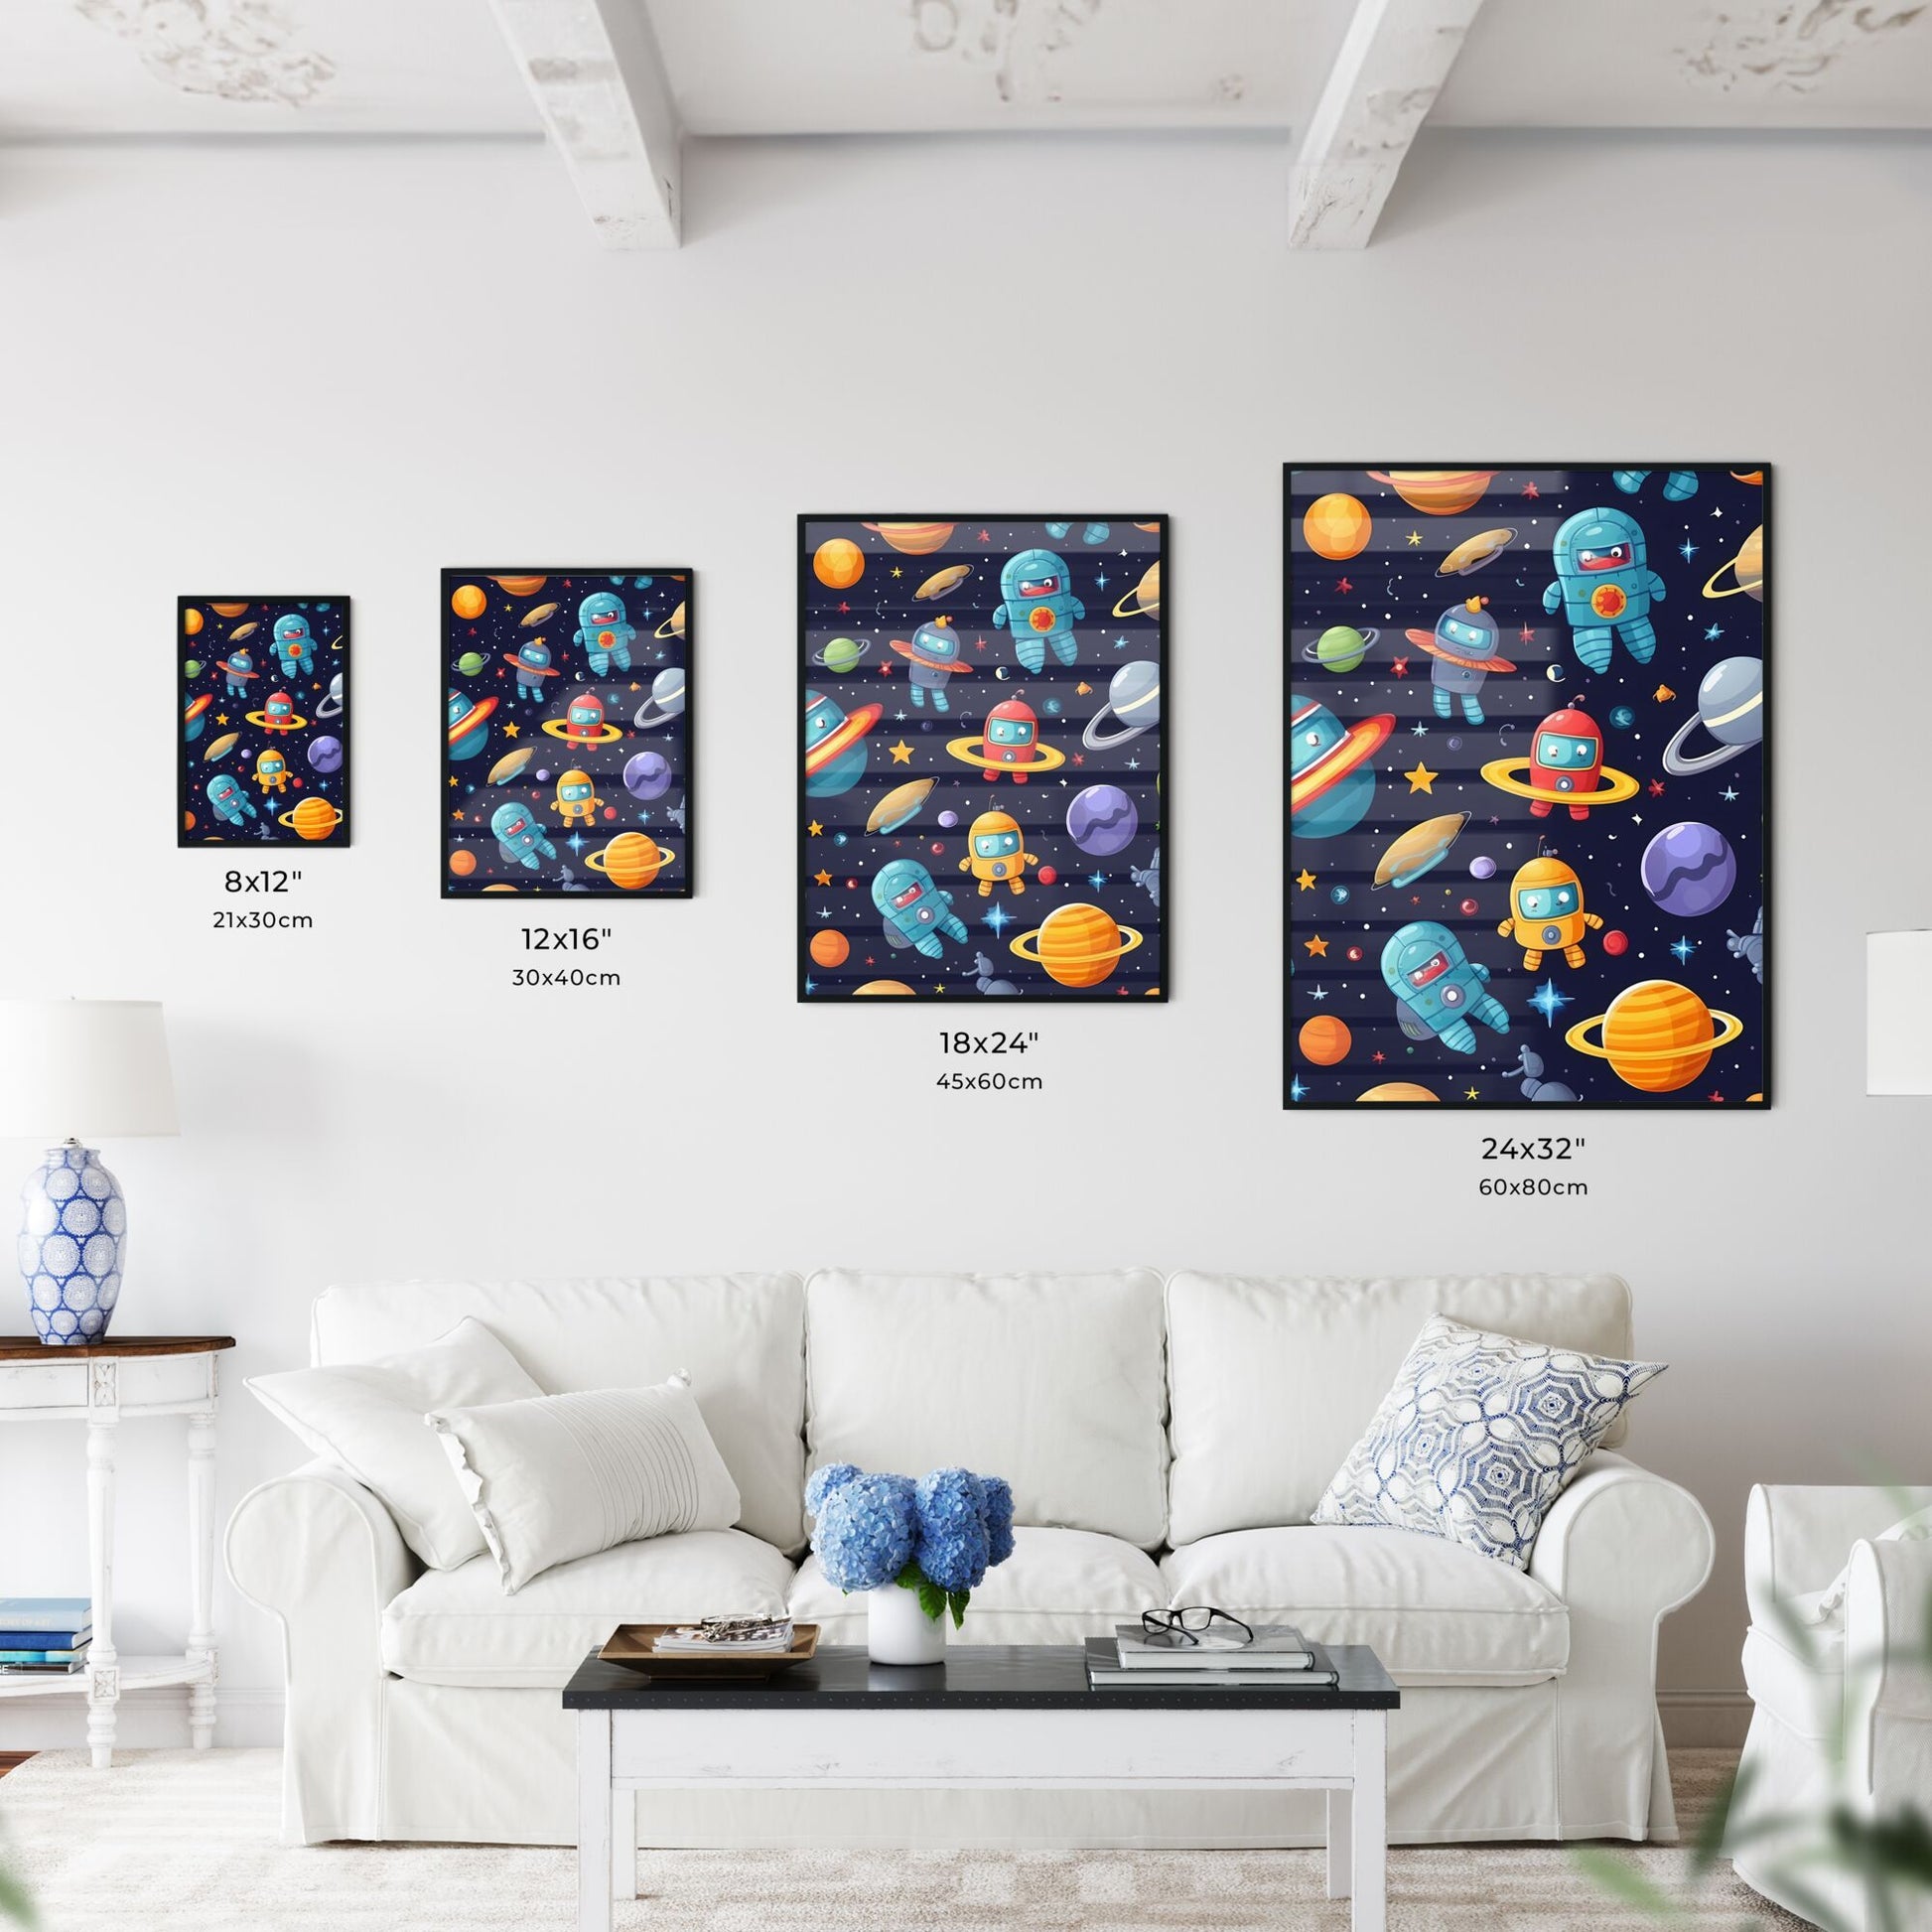 Seamless Pattern Of Cartoon Robots And Planets Art Print Default Title